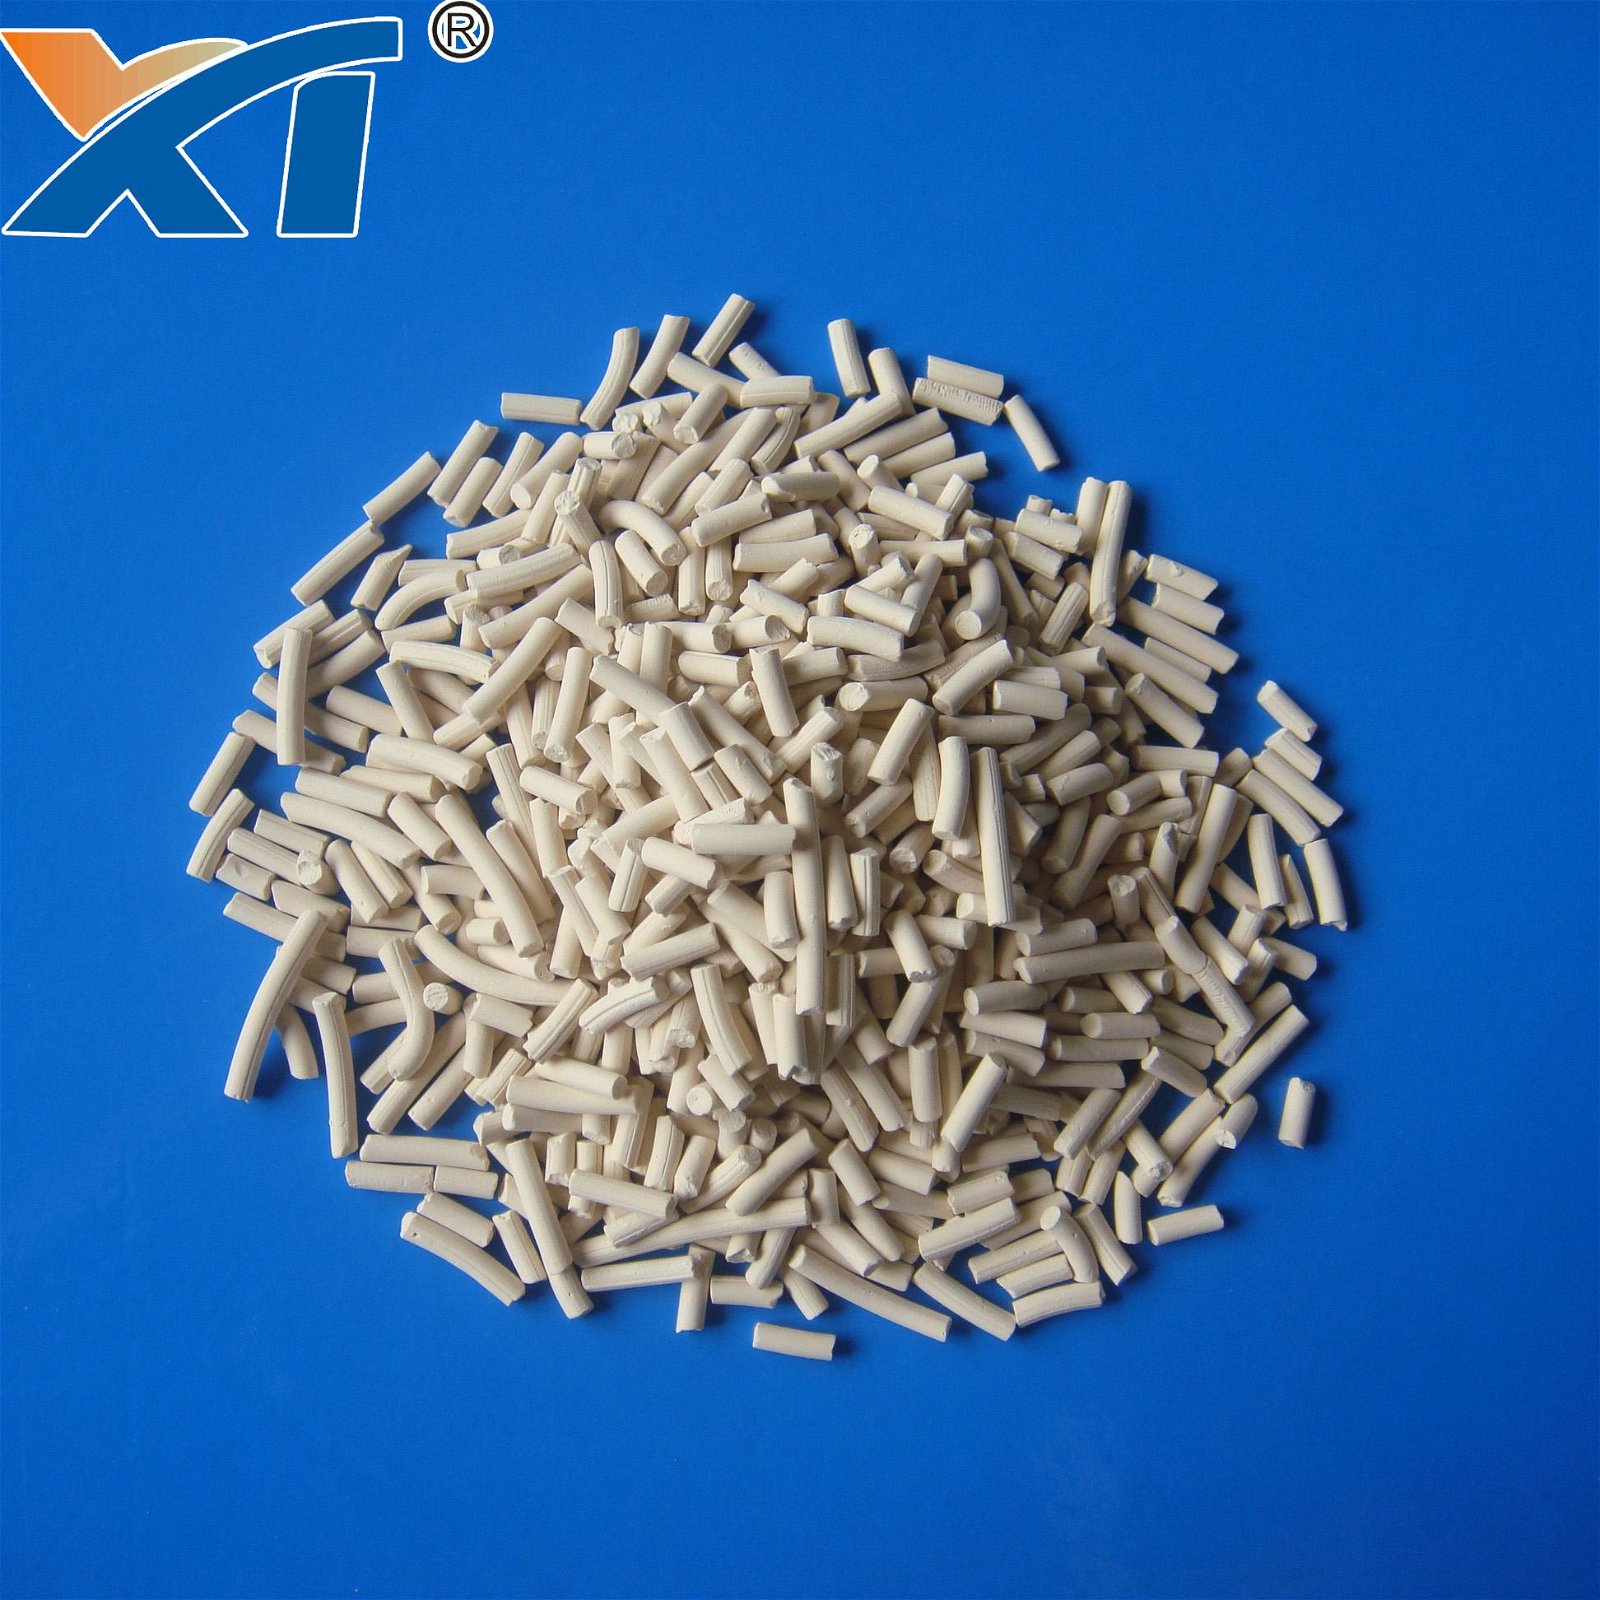 Molecular sieve 13x apg for air cryp-seperation for removal CO2 and H2O